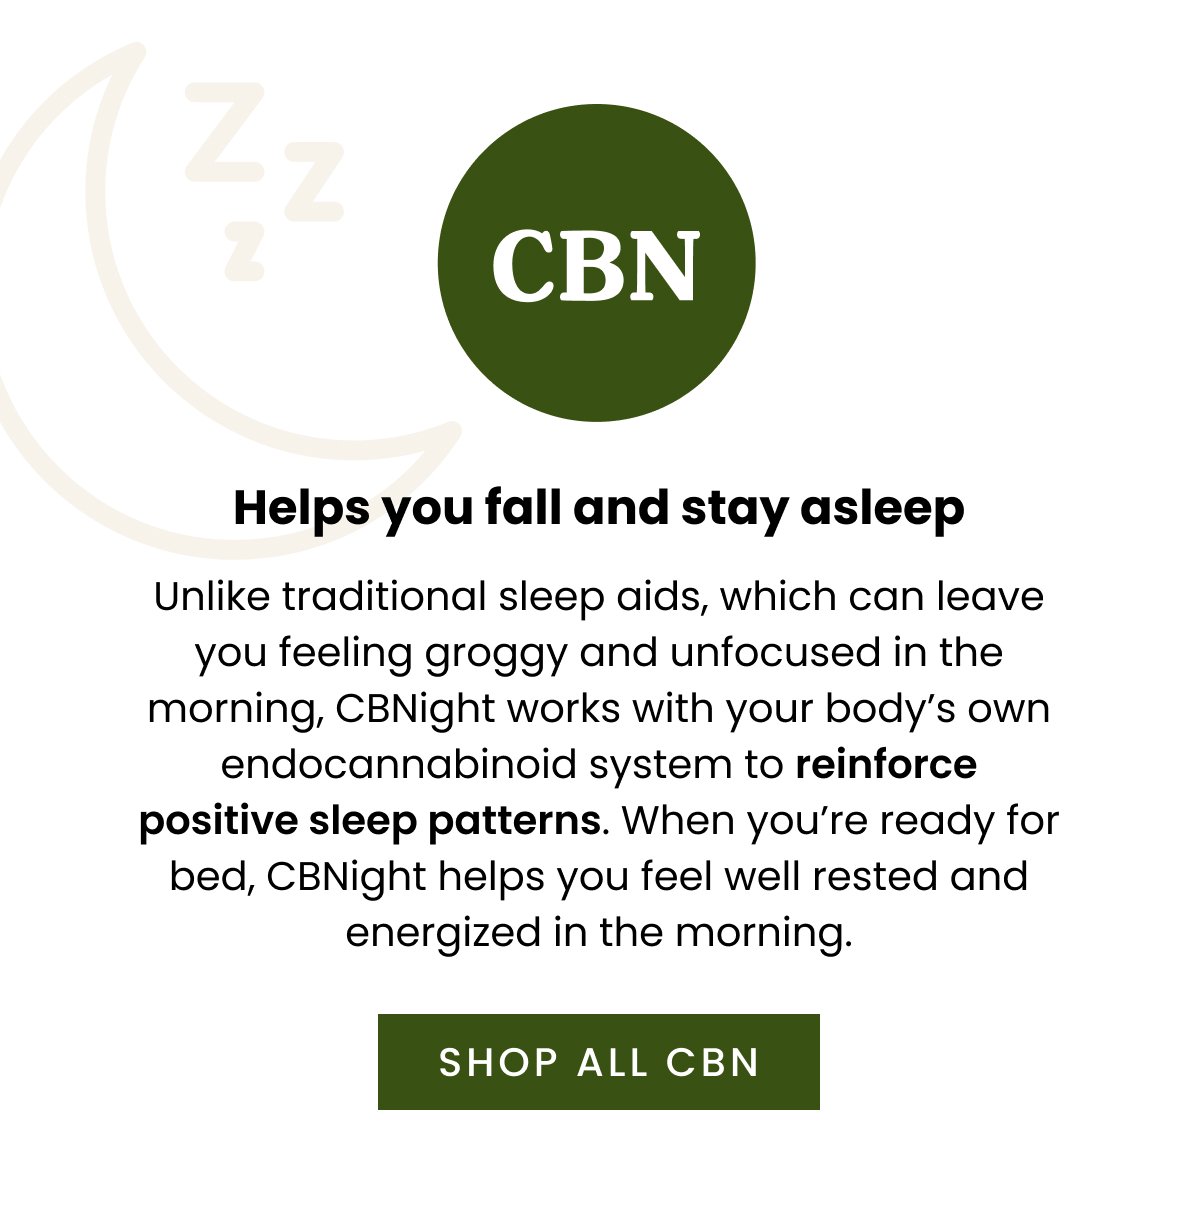 CBNight: Helps you fall and stay asleep.